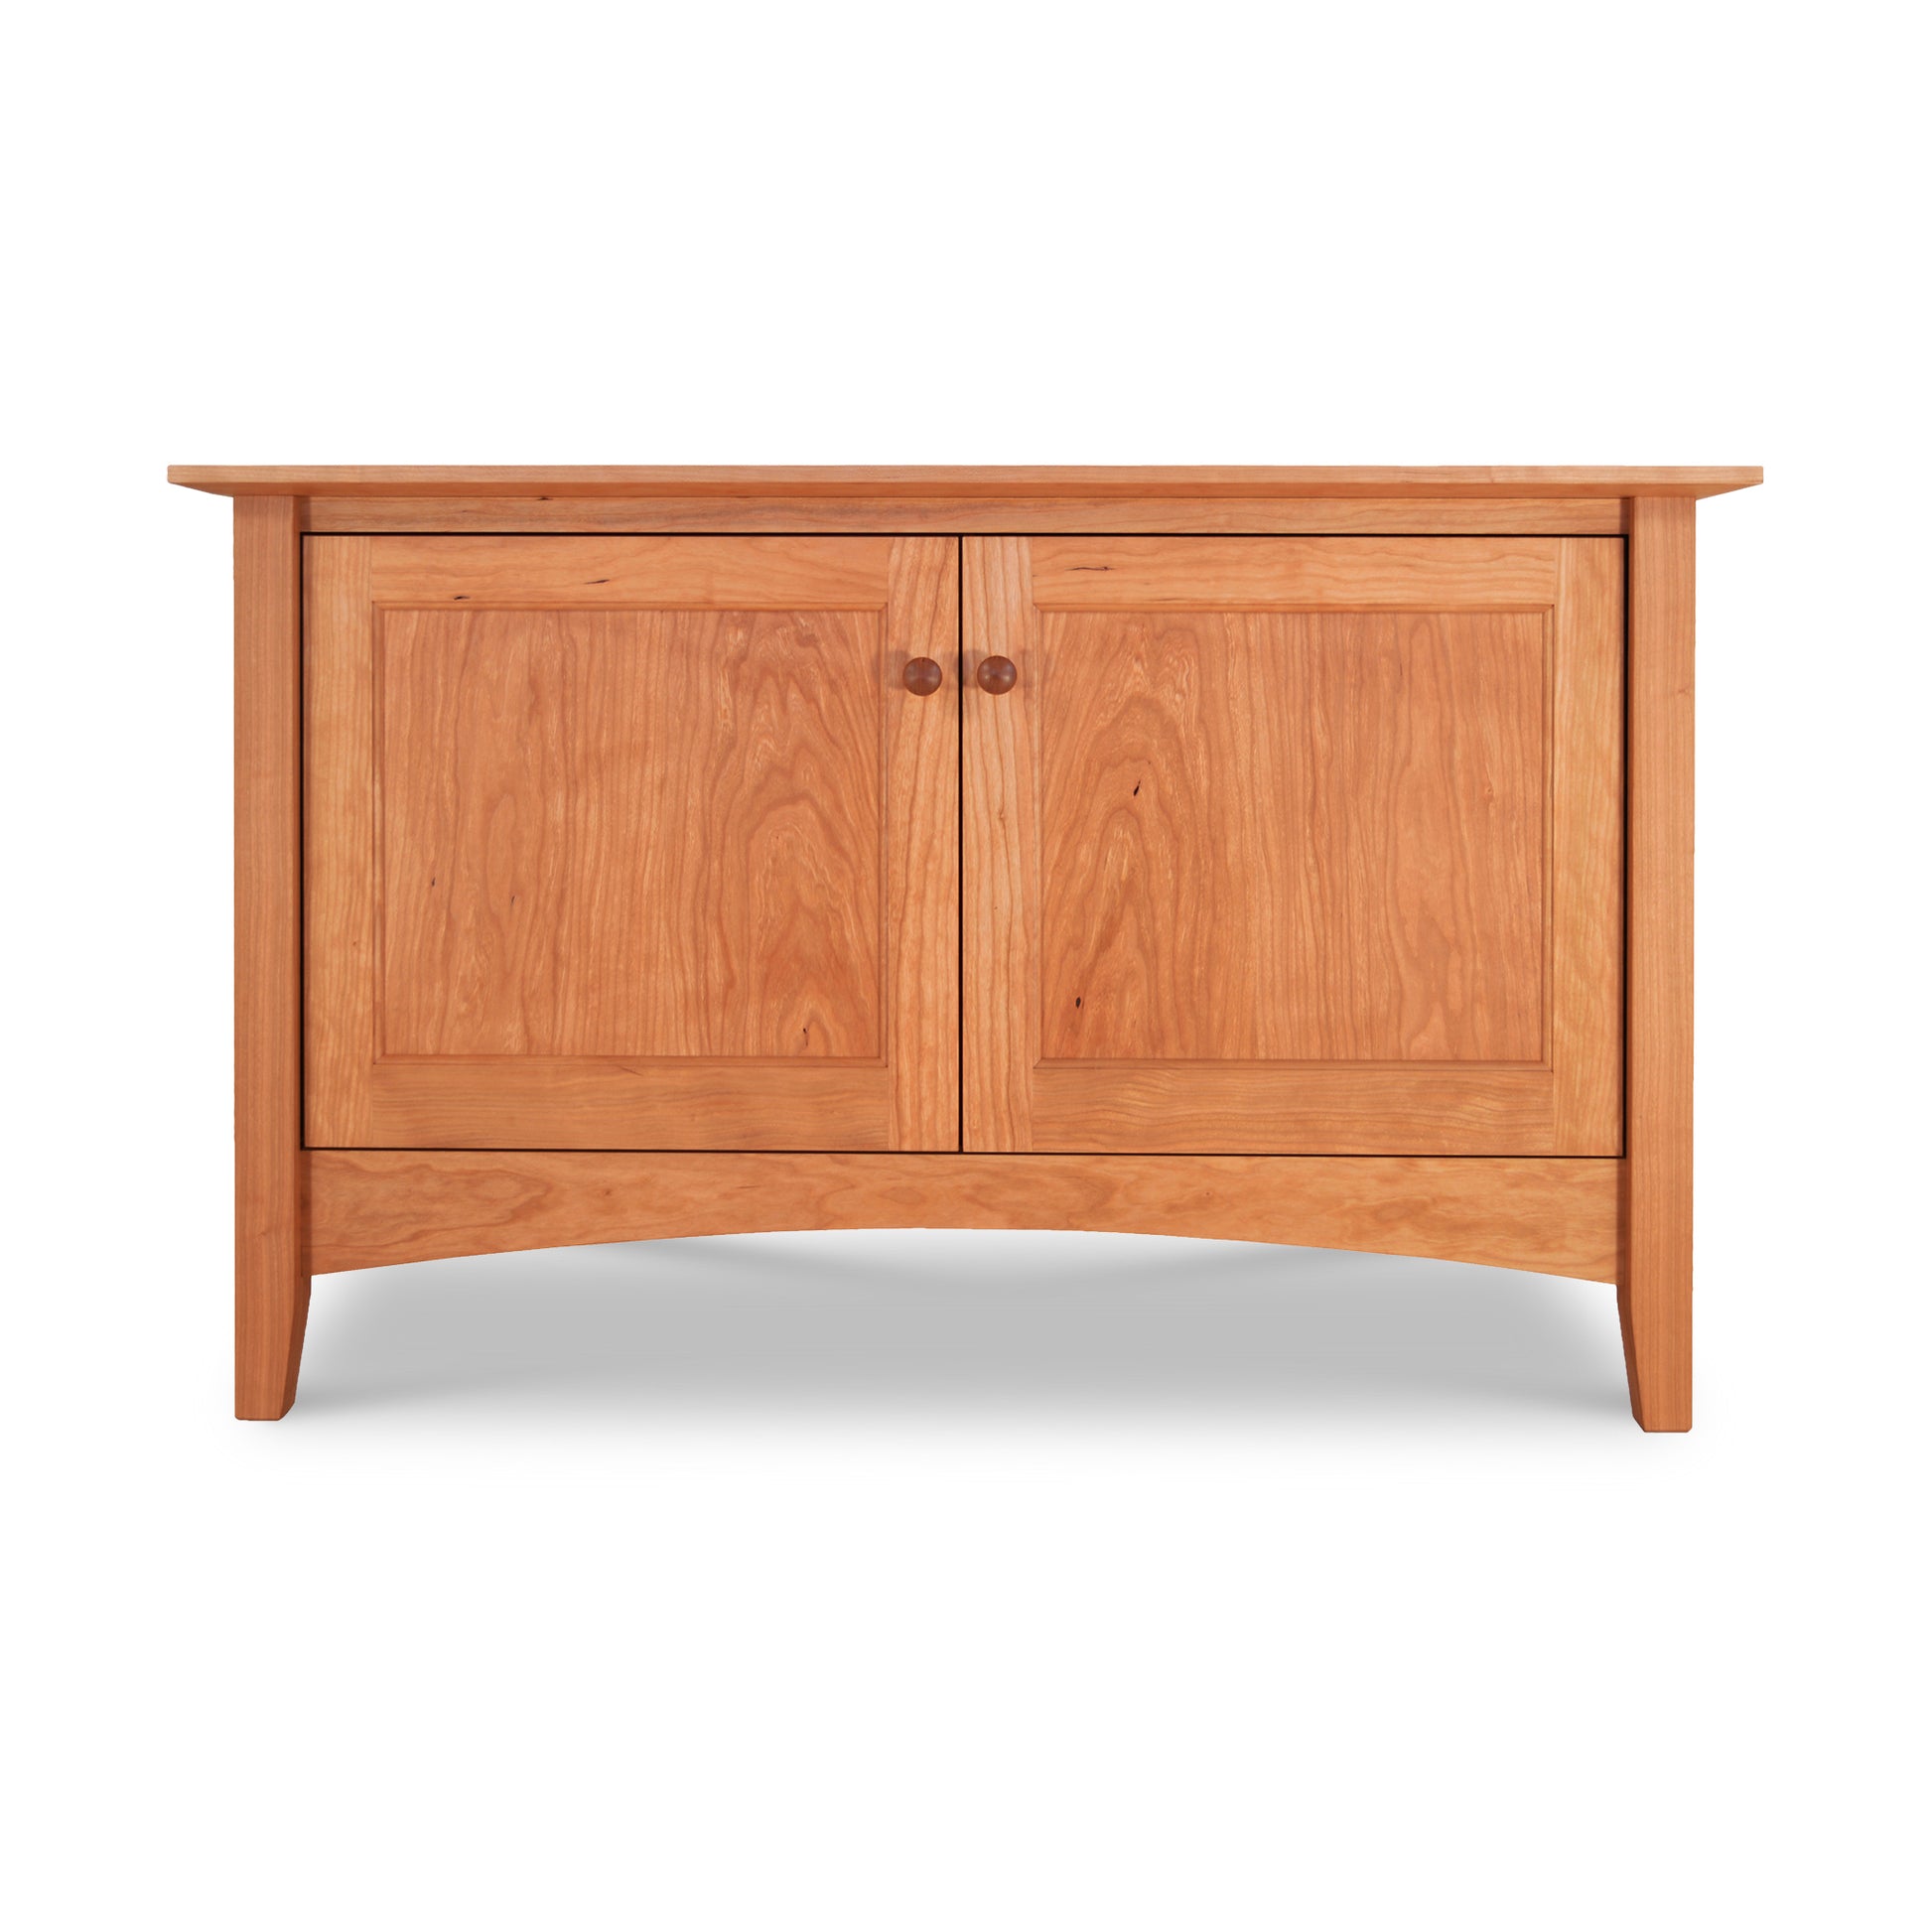 A small Maple Corner Woodworks American Shaker 48" TV Stand crafted with solid hardwoods and Vermont craftsmanship, featuring two doors and two drawers.